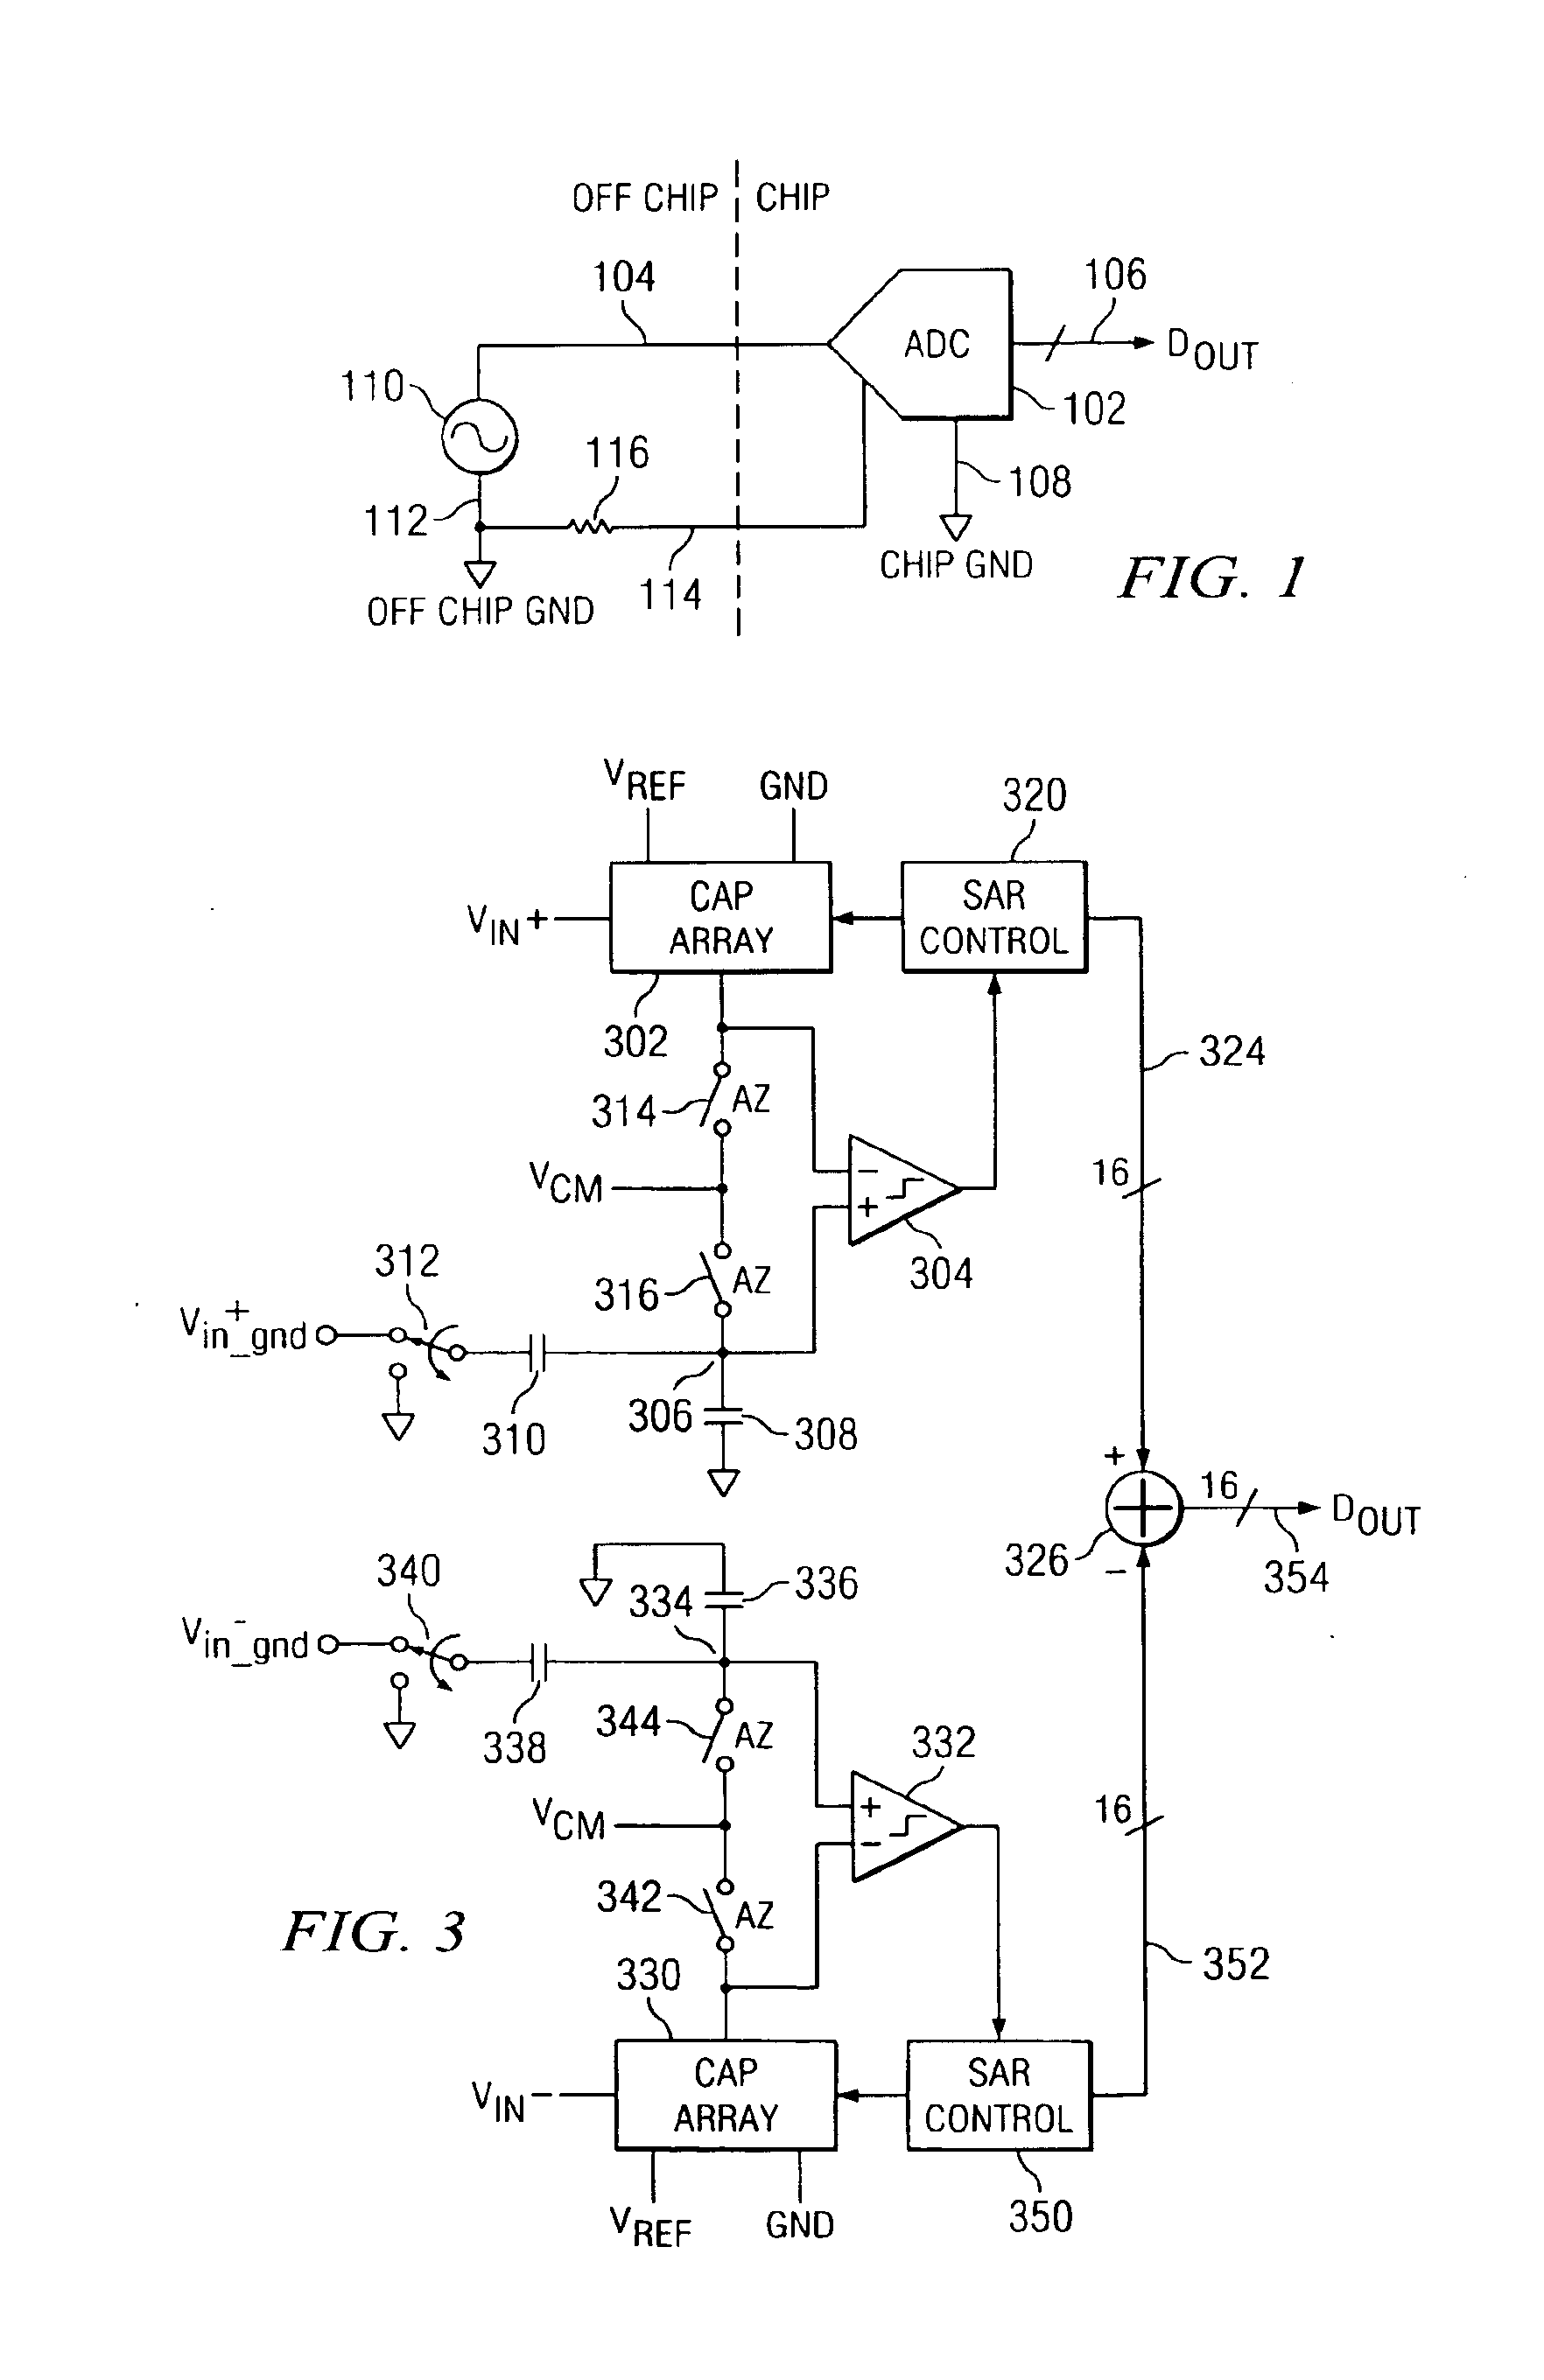 Common centroid layout for parallel resistors in an amplifier with matched AC performance